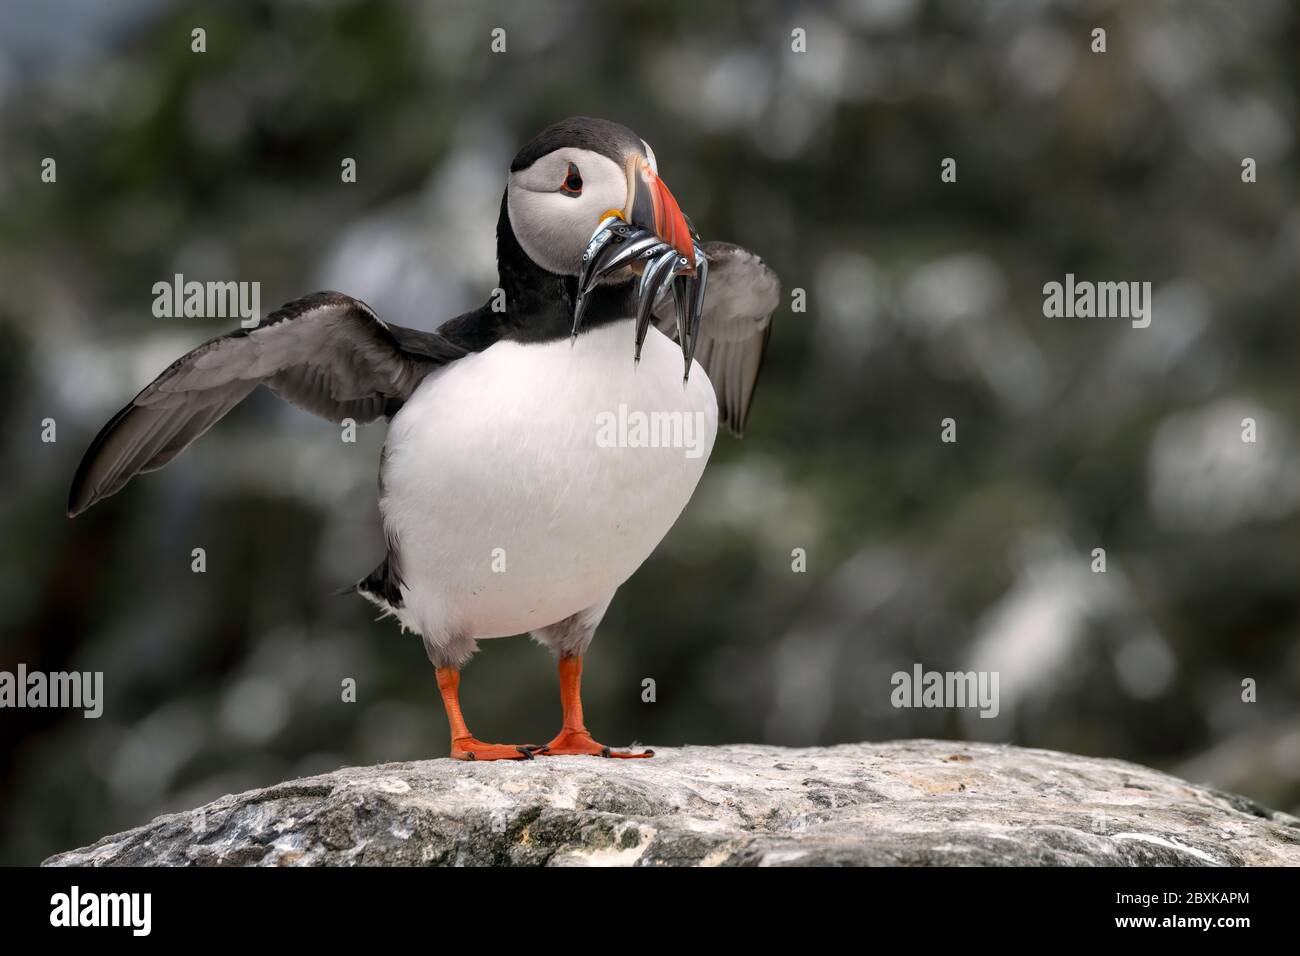 Puffin standing on a rock with sand eels in its mouth flapping its wings. The breeding colony can be seen in the background. Stock Photo